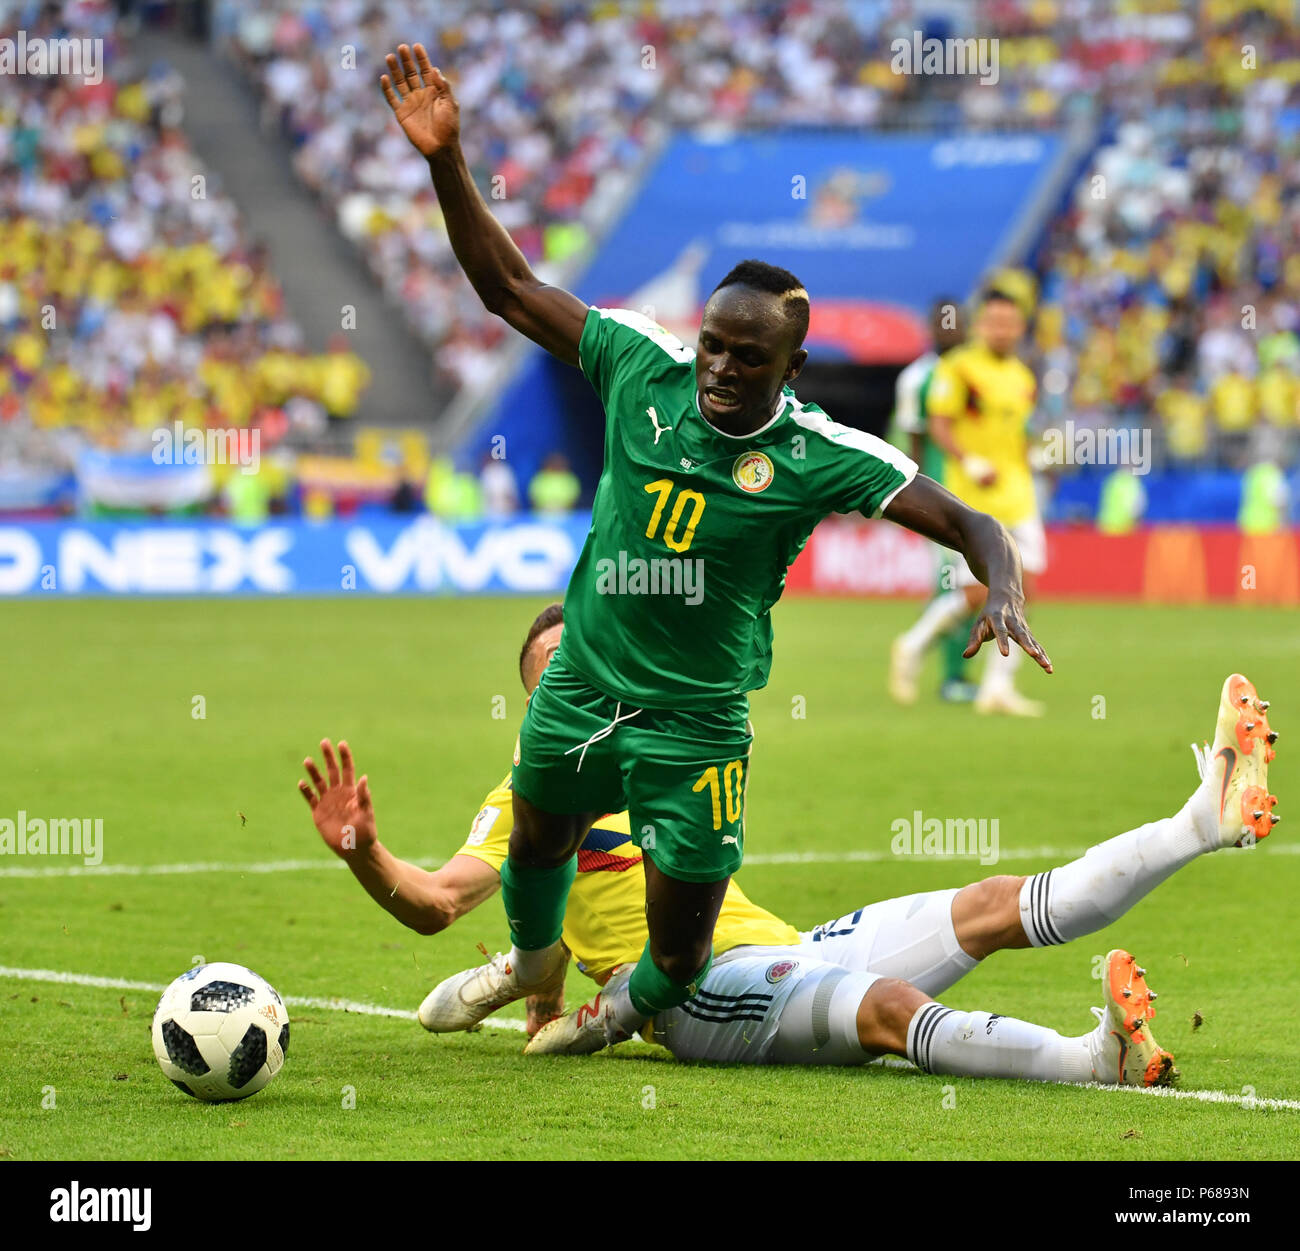 Samara, Russia. 28th June, 2018. Mateus Uribe (bottom) of Colombia vies with Sadio Mane of Senegal during the 2018 FIFA World Cup Group H match between Colombia and Senegal in Samara, Russia, June 28, 2018. Credit: Liu Dawei/Xinhua/Alamy Live News Stock Photo